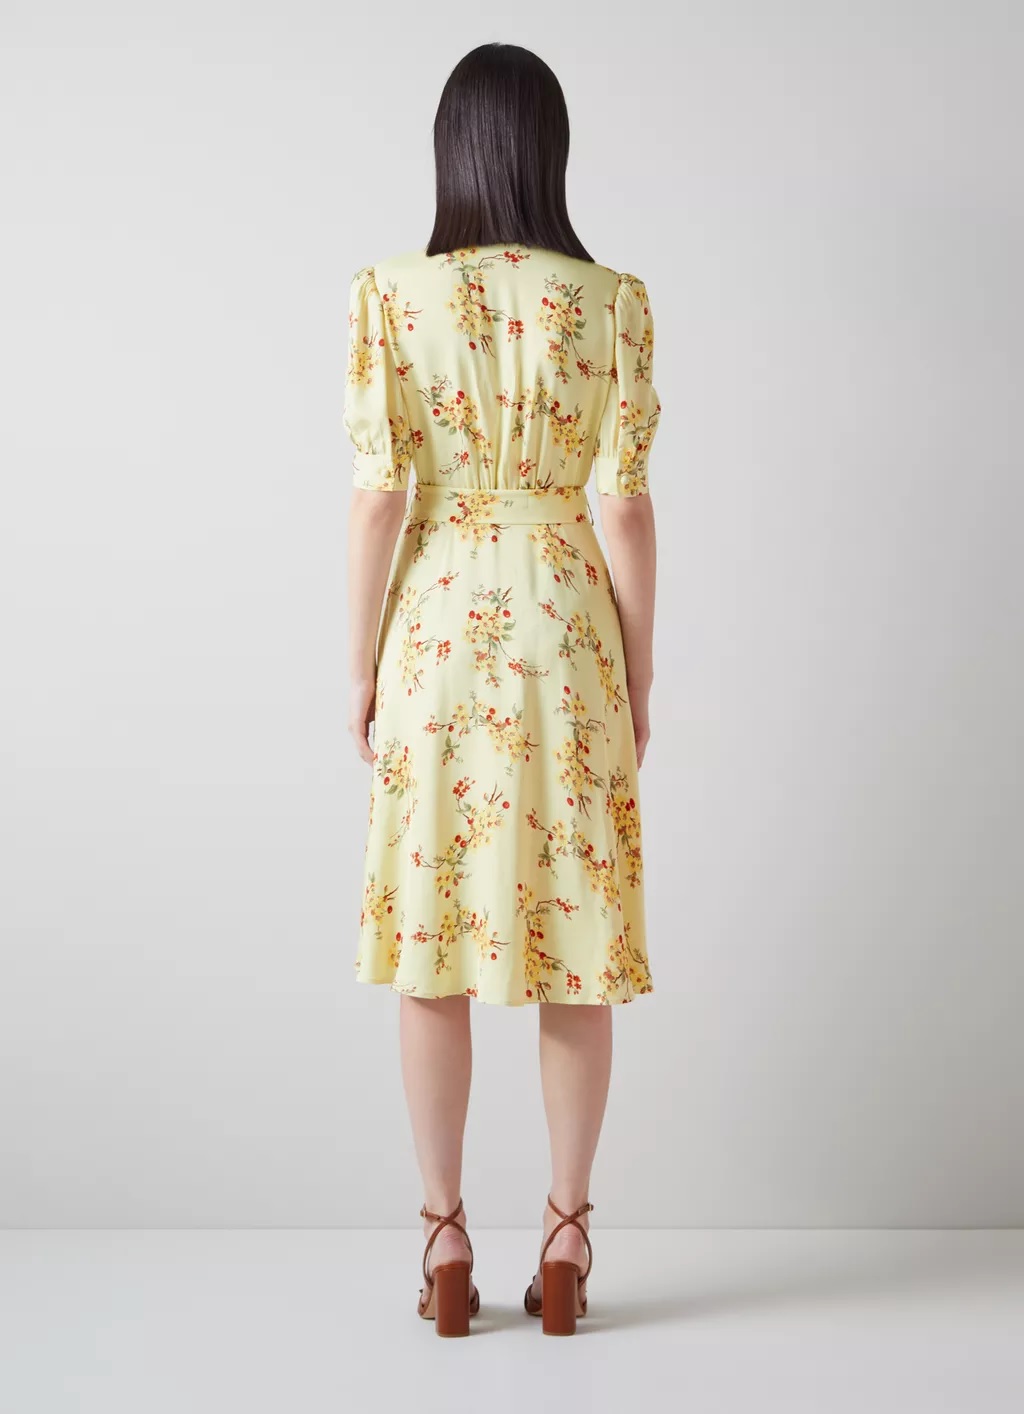 LK Bennett Amor Yellow And Red Cherry Blossom Print Crepe Dress back view